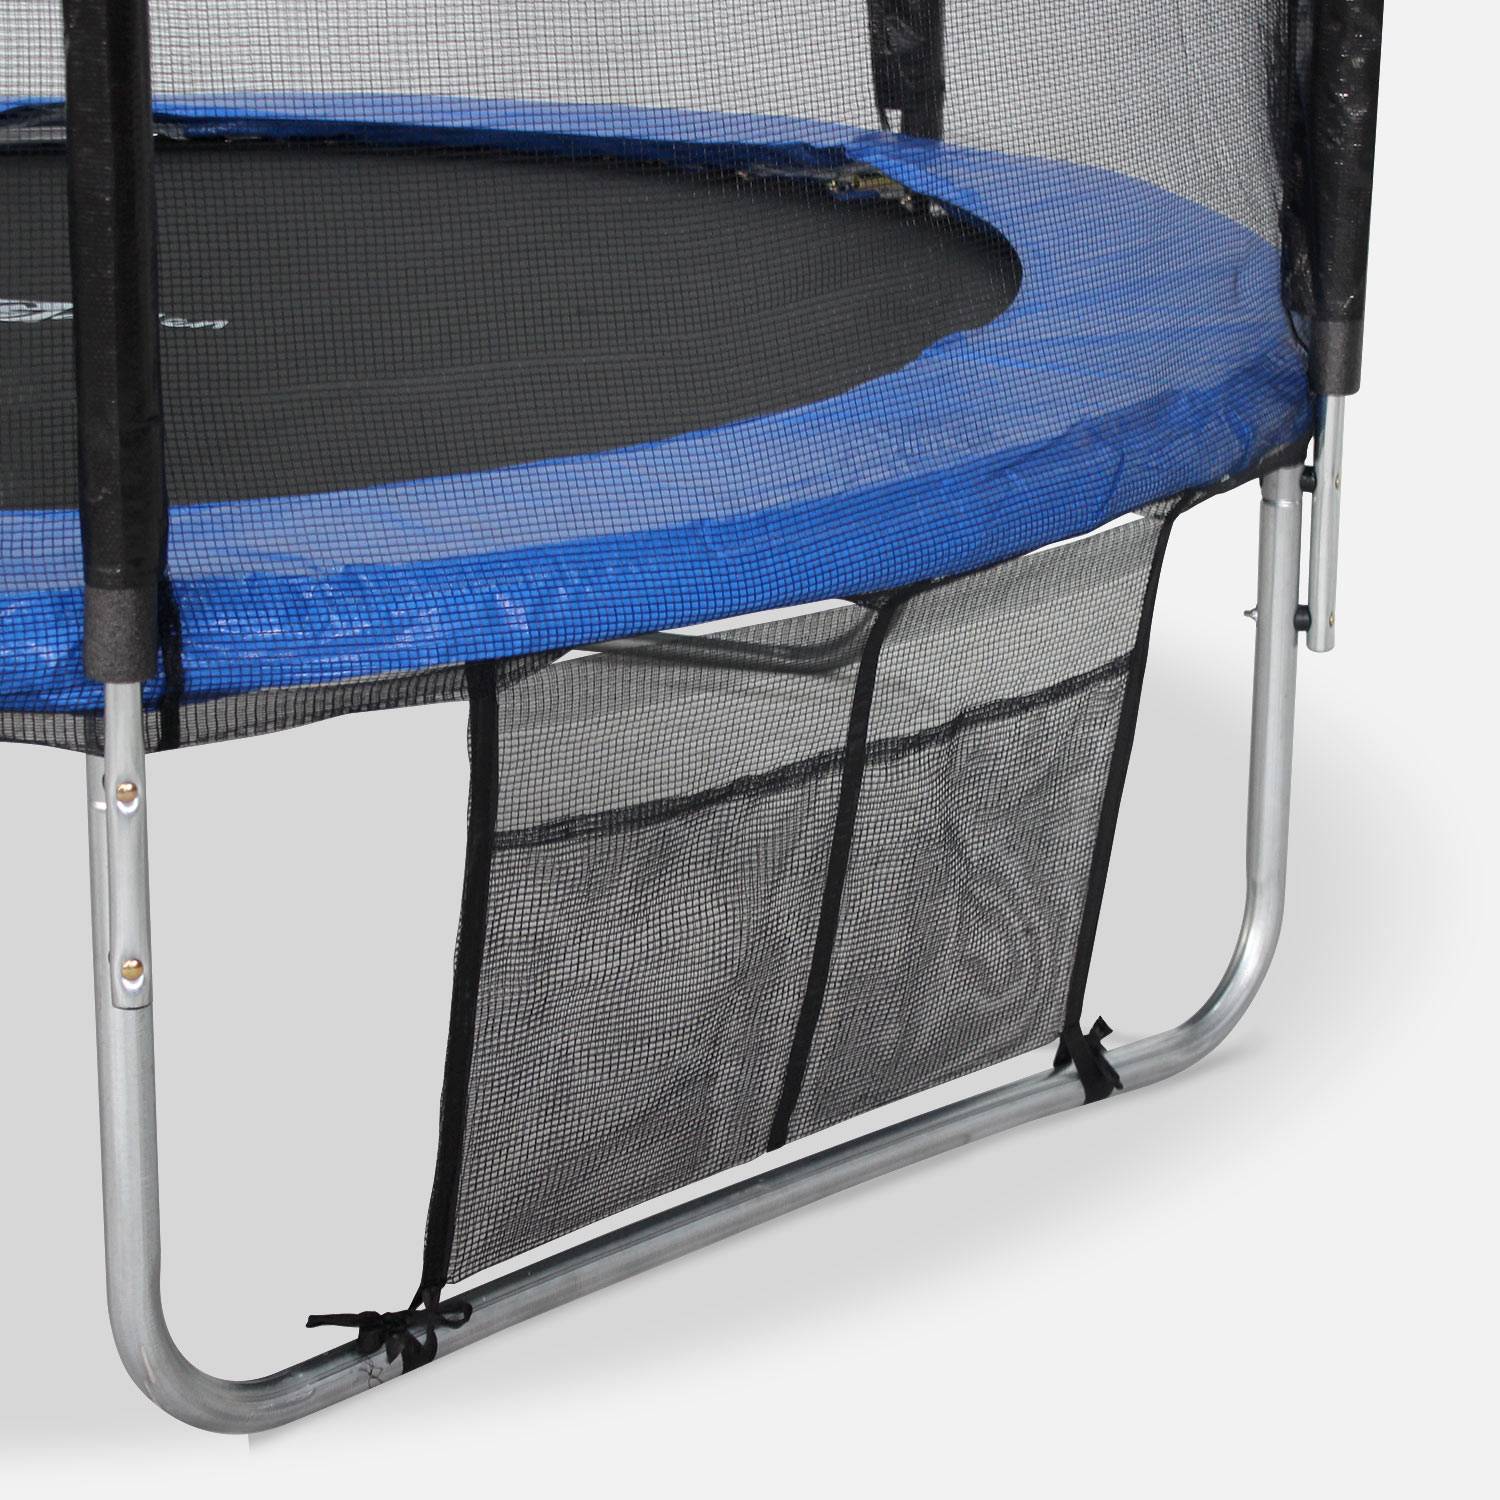 Ø13ft trampoline with accessory kit, shoe organiser, ladder, rain cover, safety net and anchoring kit Photo4